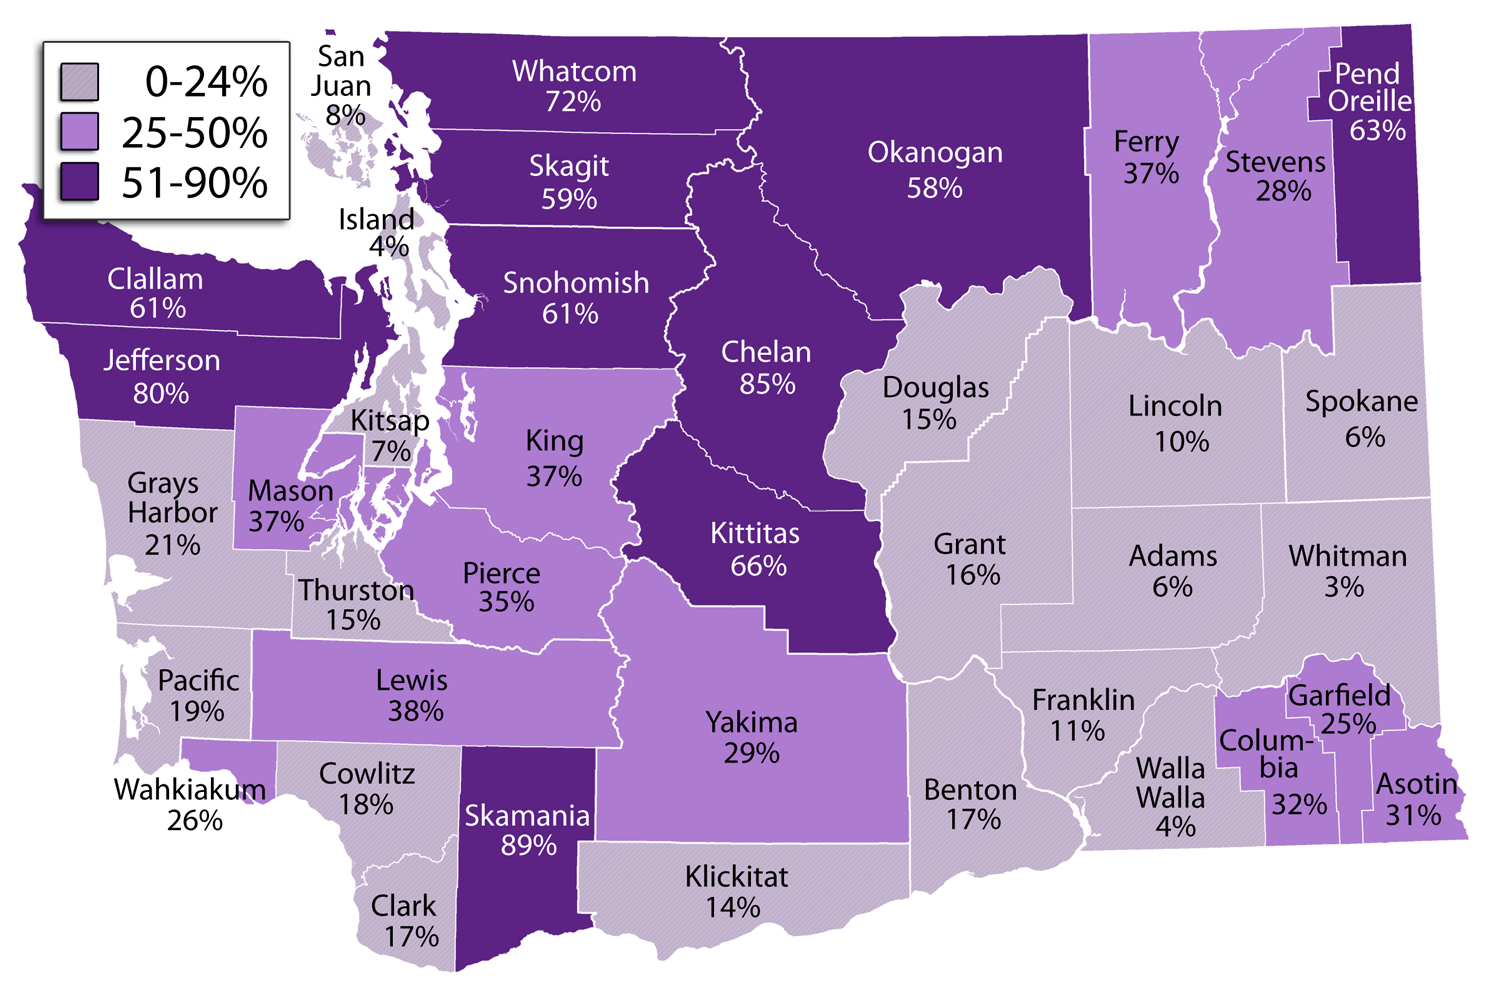 Map of Washington counties with percent of public natural resource lands listed by county